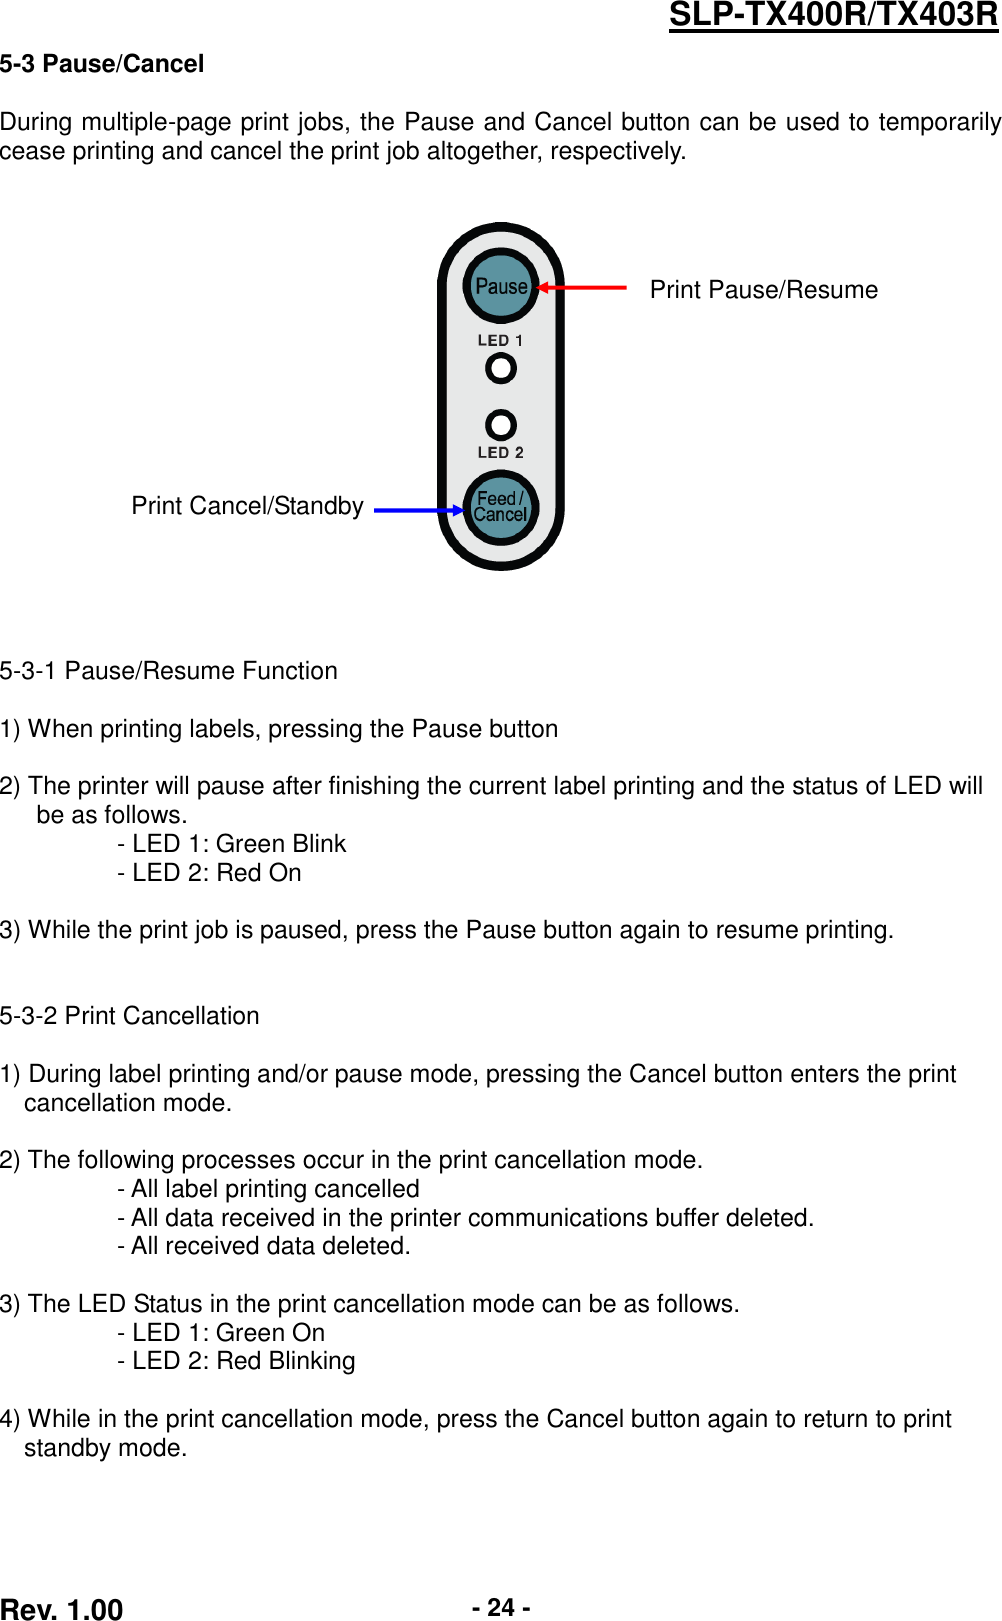  Rev. 1.00 - 24 - SLP-TX400R/TX403R 5-3 Pause/Cancel  During multiple-page print jobs, the Pause and Cancel button can be used to temporarily cease printing and cancel the print job altogether, respectively.       5-3-1 Pause/Resume Function  1) When printing labels, pressing the Pause button    2) The printer will pause after finishing the current label printing and the status of LED will   be as follows.     - LED 1: Green Blink     - LED 2: Red On  3) While the print job is paused, press the Pause button again to resume printing.   5-3-2 Print Cancellation  1) During label printing and/or pause mode, pressing the Cancel button enters the print cancellation mode.  2) The following processes occur in the print cancellation mode.   - All label printing cancelled   - All data received in the printer communications buffer deleted.   - All received data deleted.  3) The LED Status in the print cancellation mode can be as follows.   - LED 1: Green On   - LED 2: Red Blinking  4) While in the print cancellation mode, press the Cancel button again to return to print standby mode. Print Pause/Resume Print Cancel/Standby  